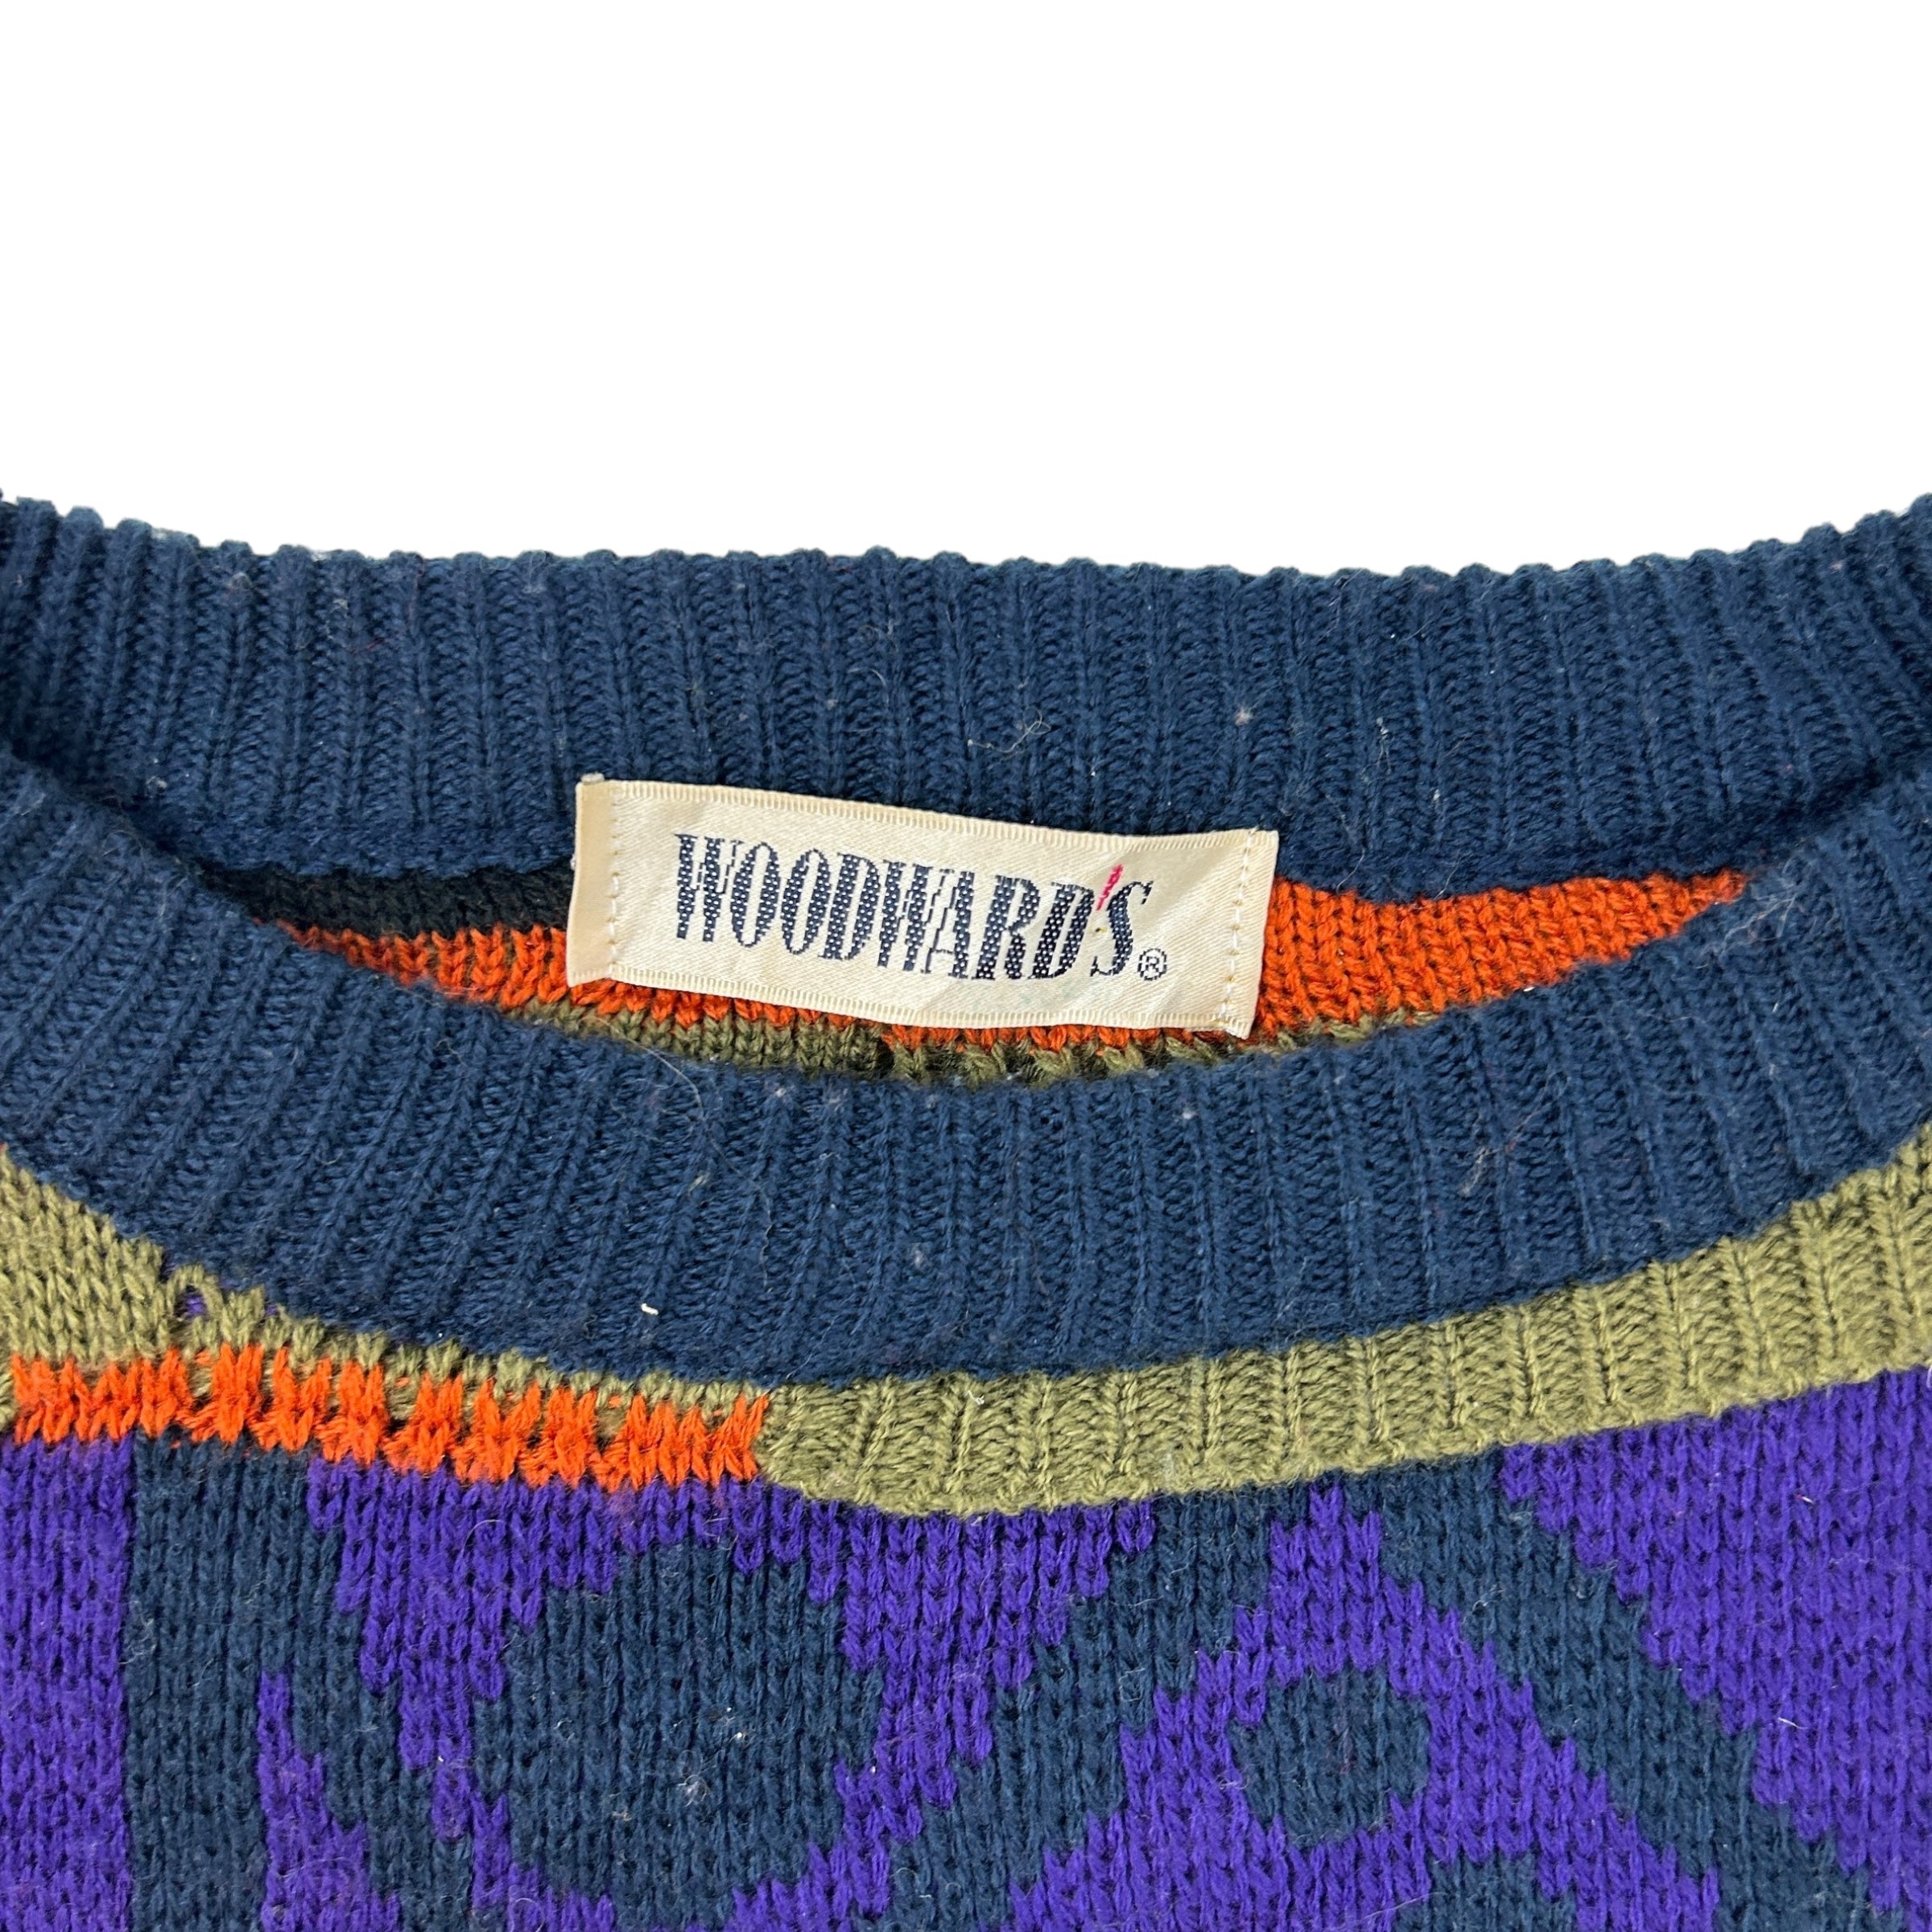 Vintage Woodward's Multicolor Knit Sweater